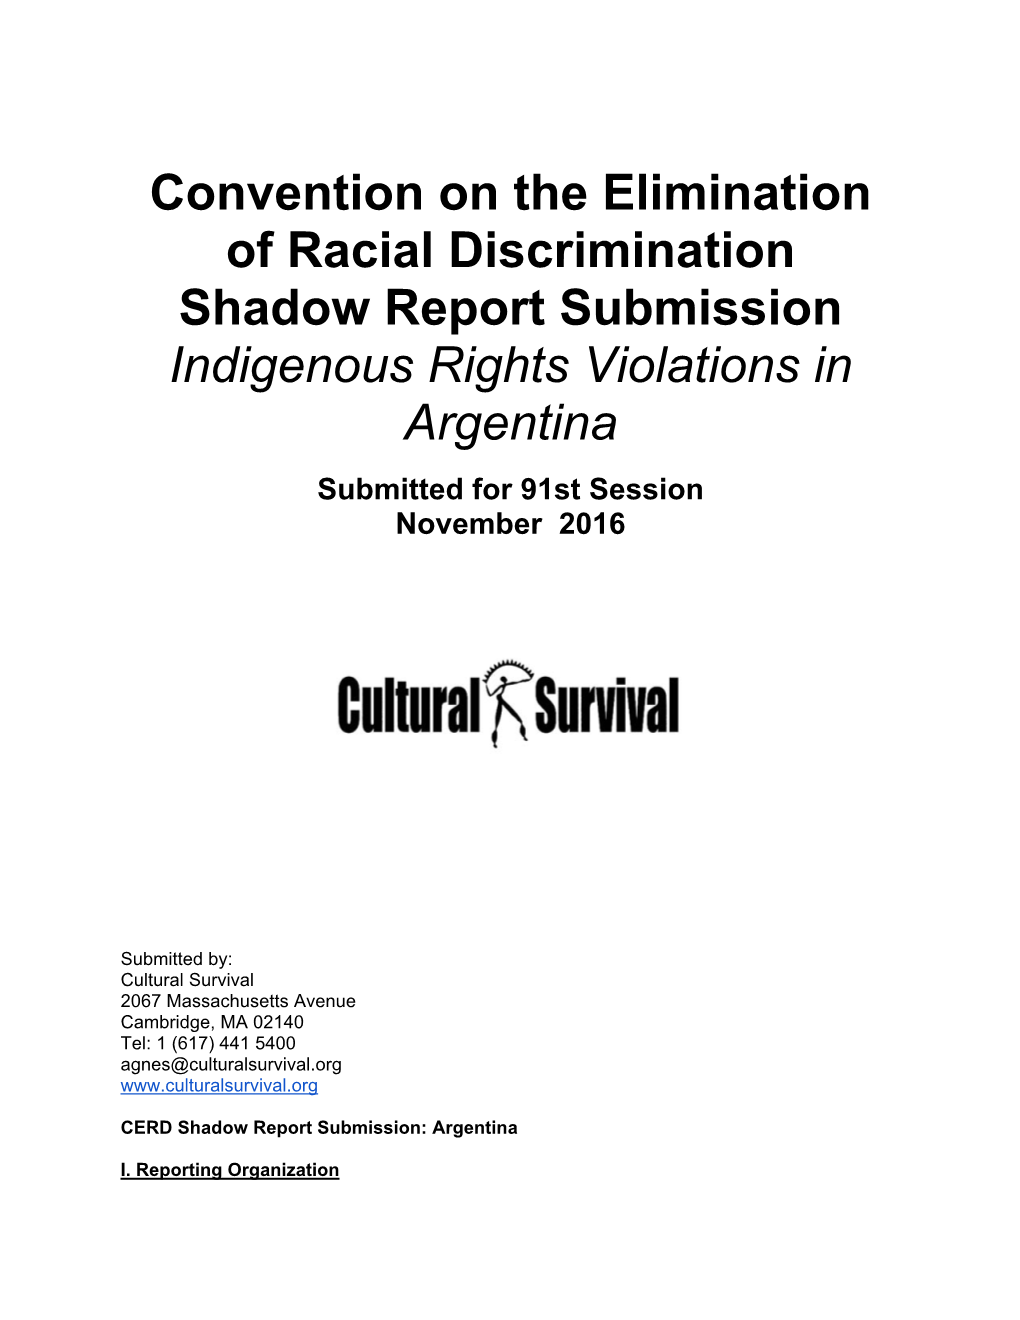 Convention on the Elimination of Racial Discrimination Shadow